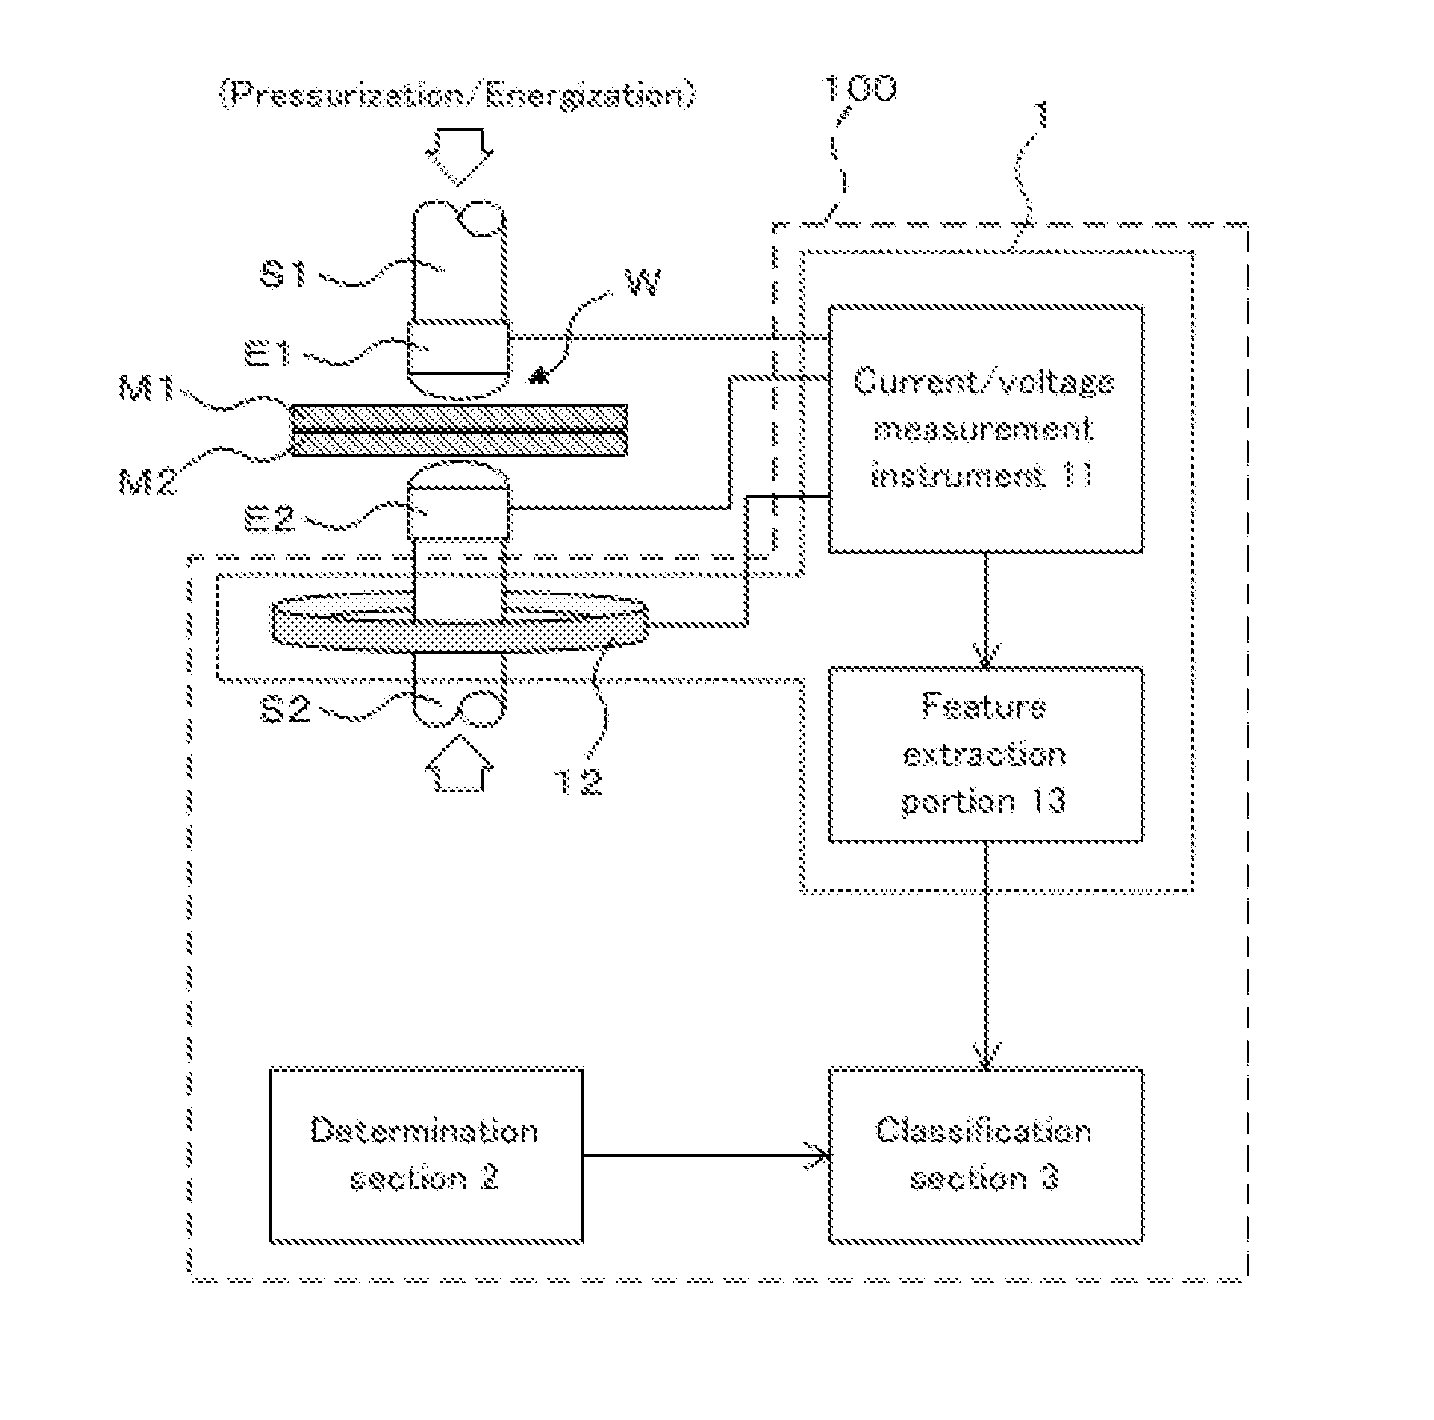 Welding quality classification apparatus